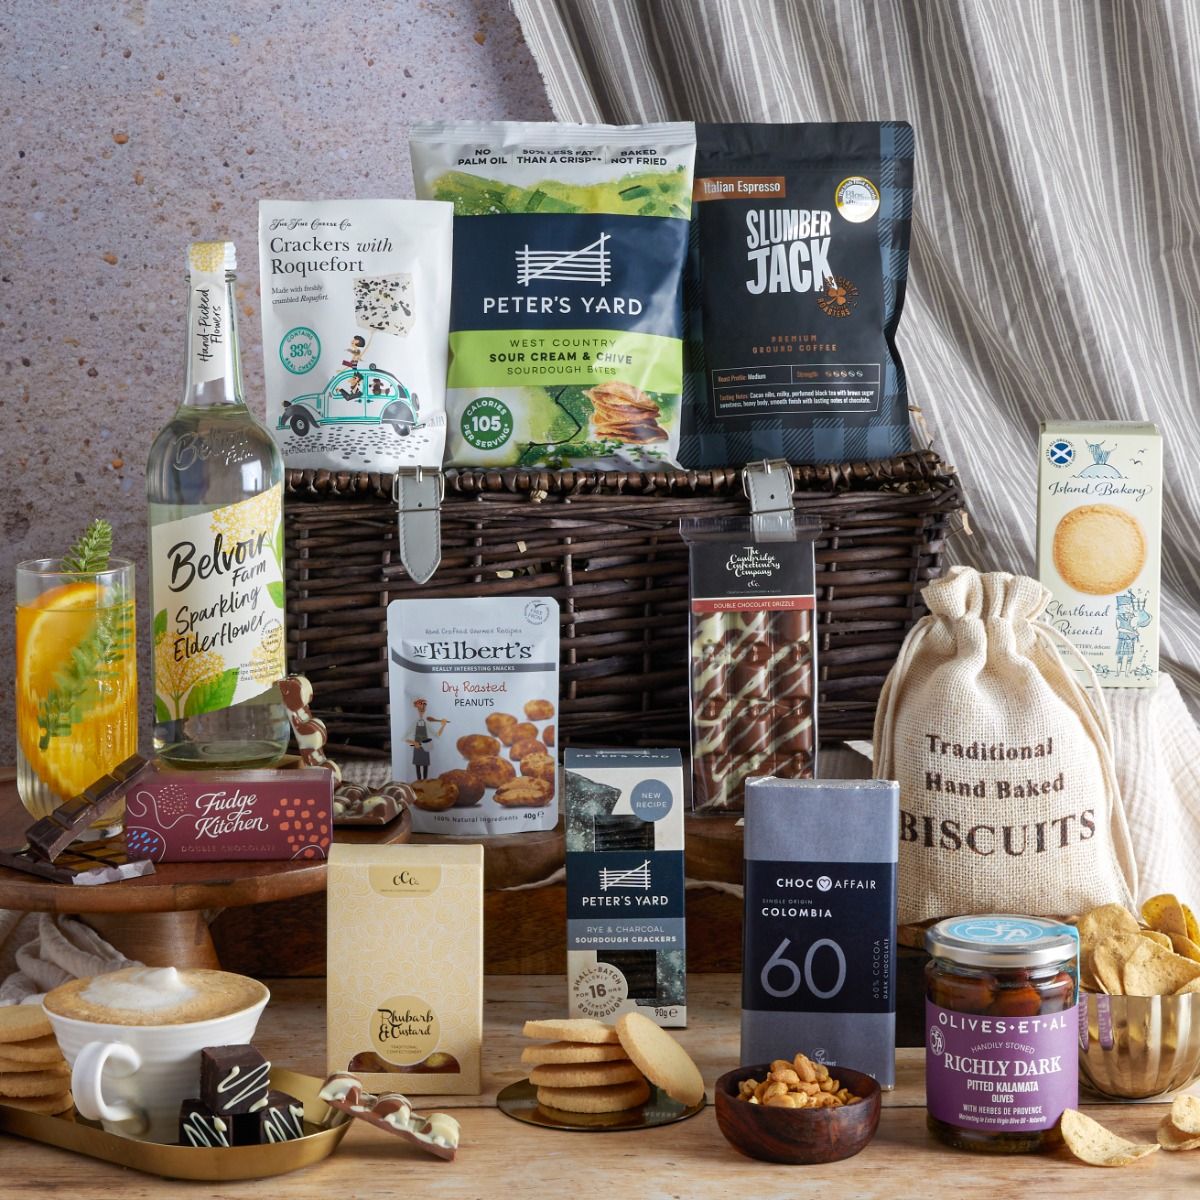 Classic Alcohol Free Hamper with contents on display